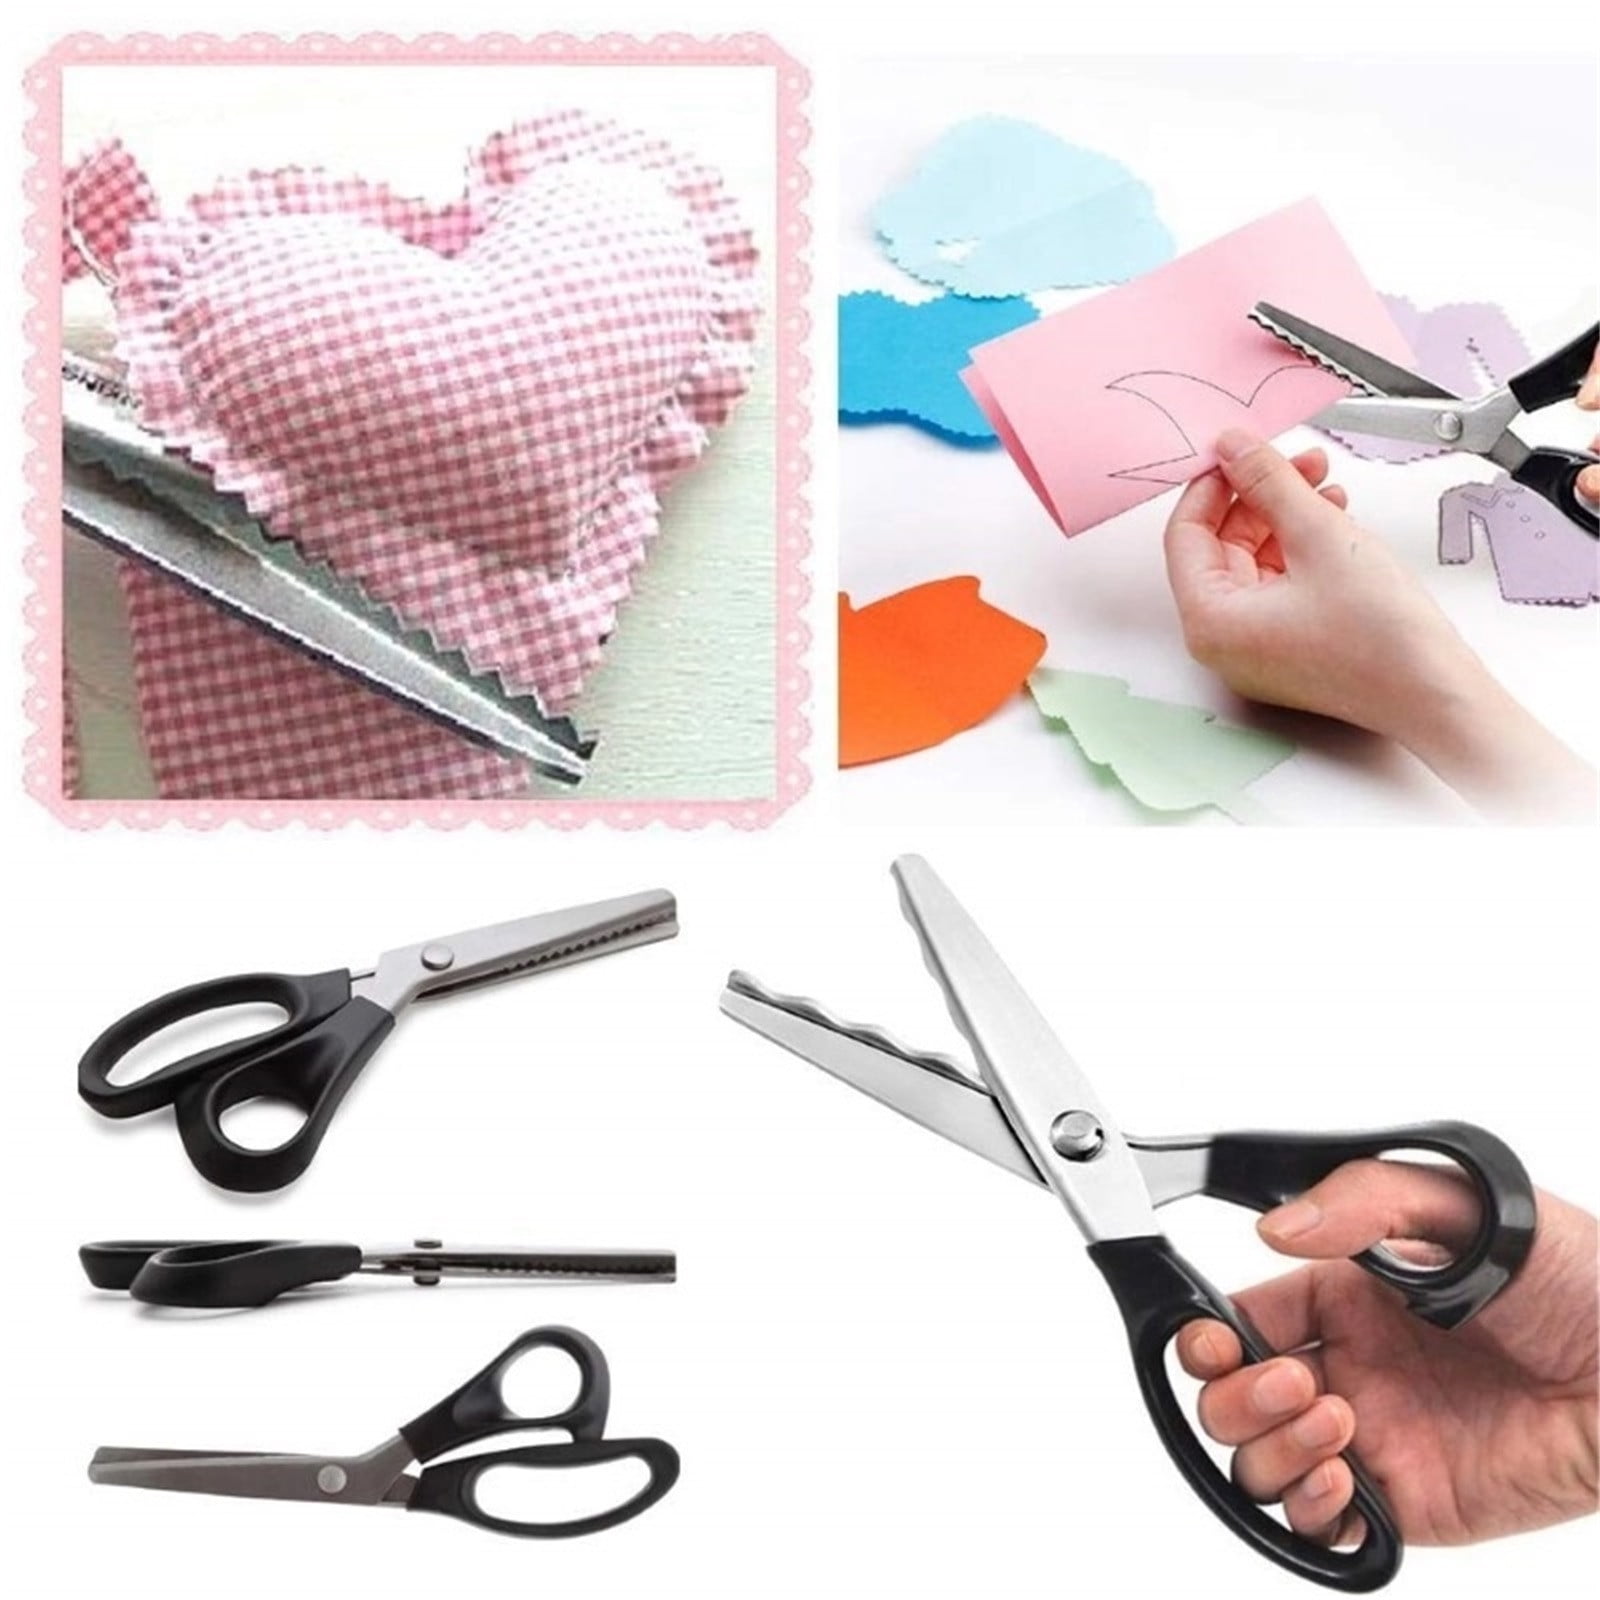 Xemz Pinking Shears Professional Stainless Steel Dressmaking Sewing Craft Scissors Comfort Grips Serrated & Scalloped Blades Cut Tailor Decorative